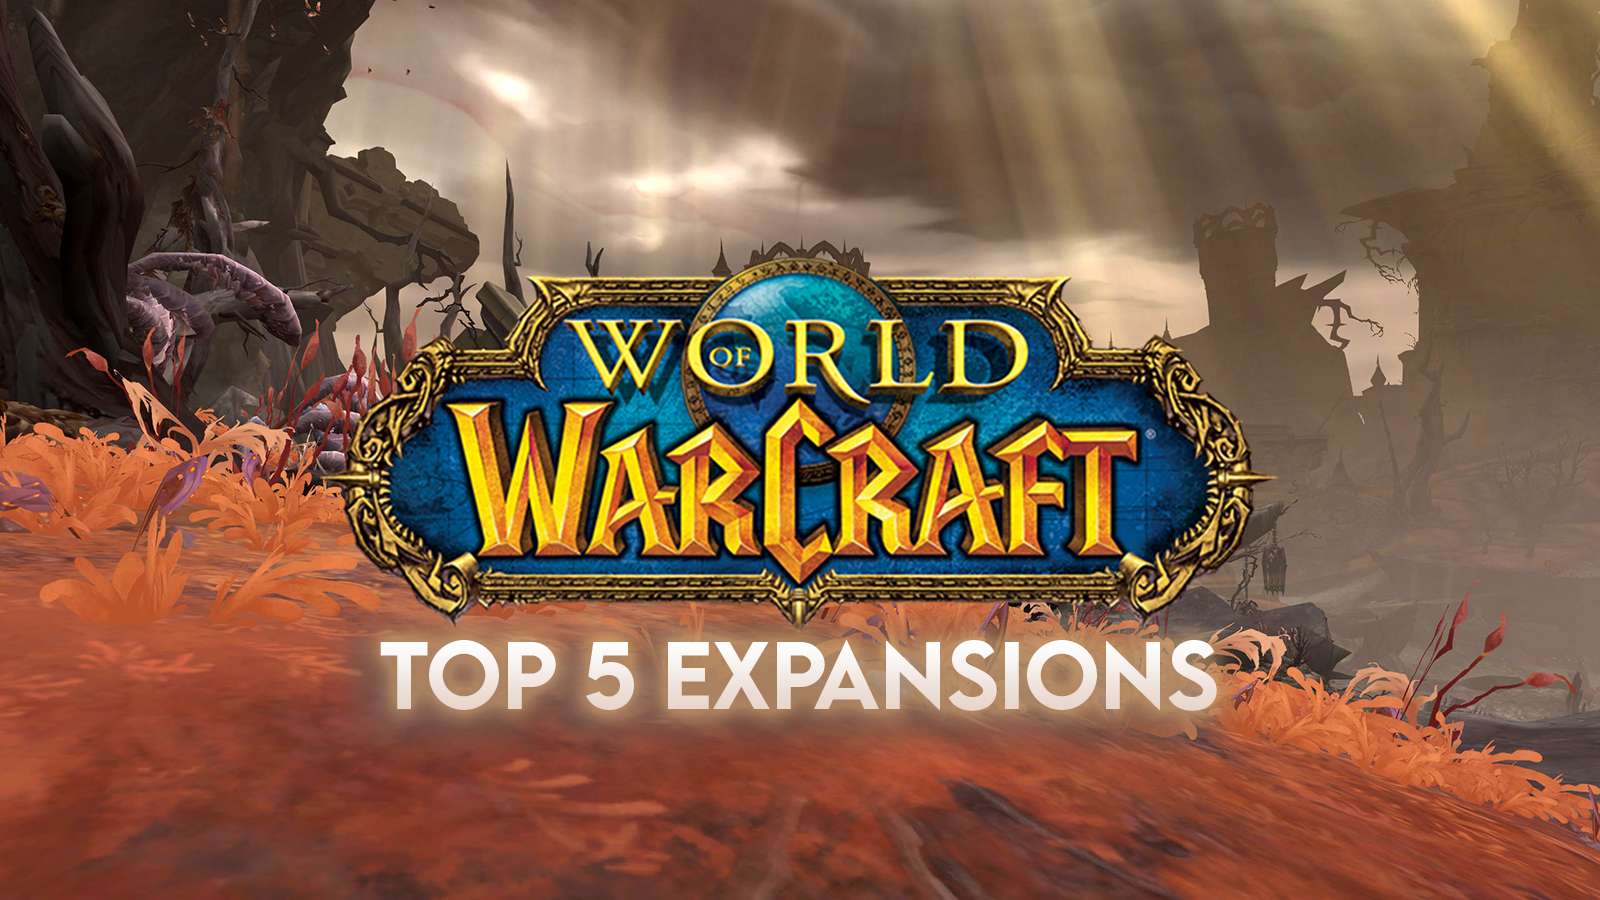 Top 5 WoW Expansion image